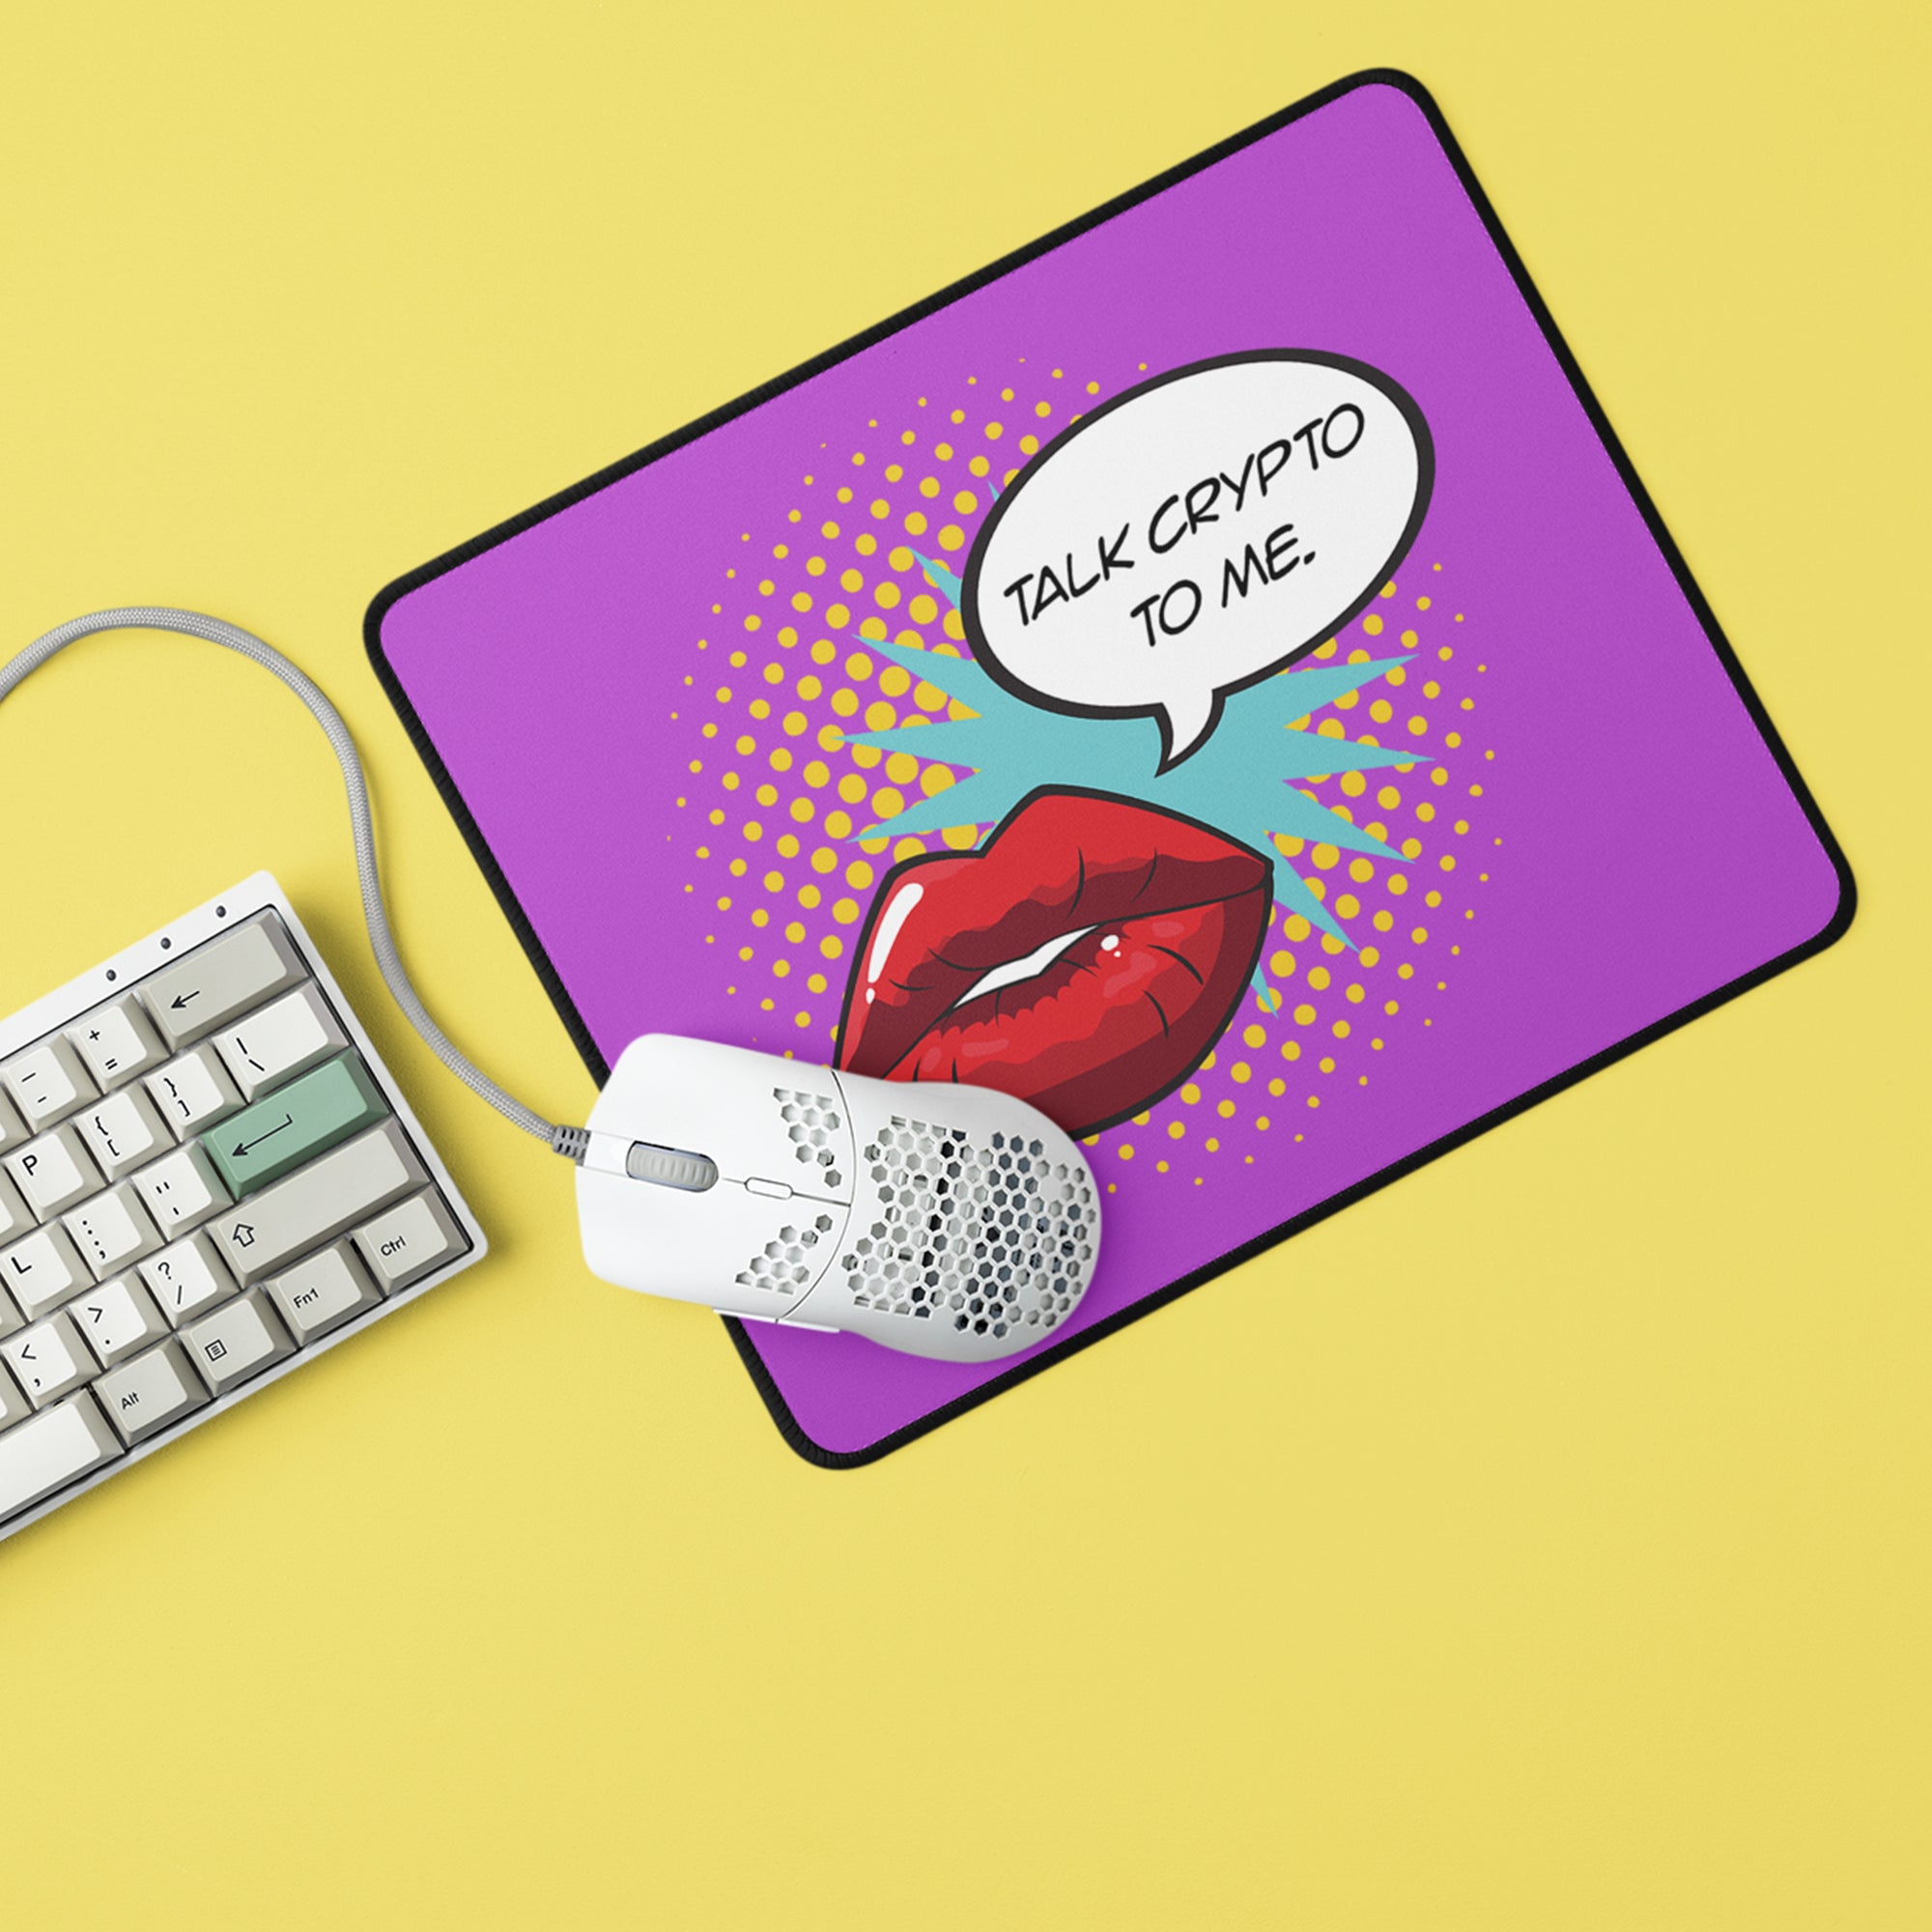 Gifts for Crypto Lovers - Talk Crypto To Me Mouse Pad displayed with keyboard and mouse.